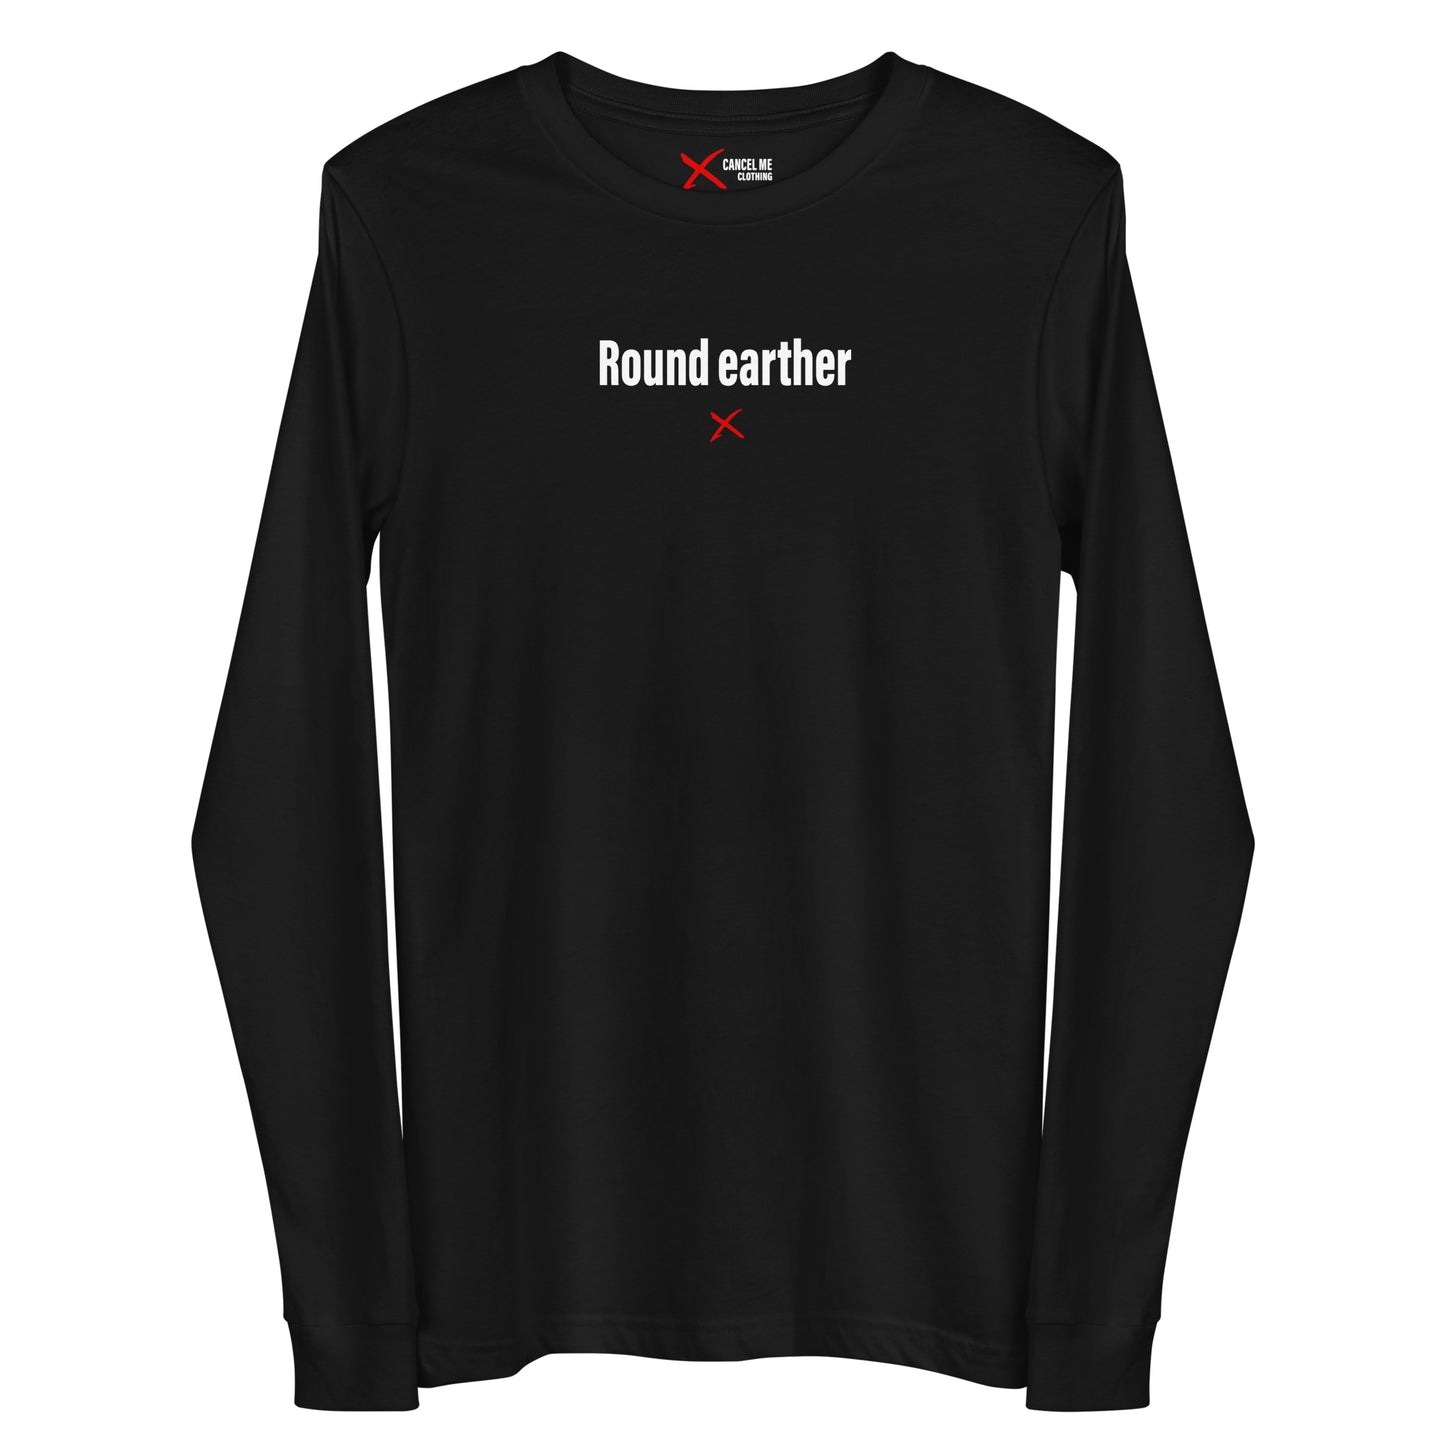 Round earther - Longsleeve